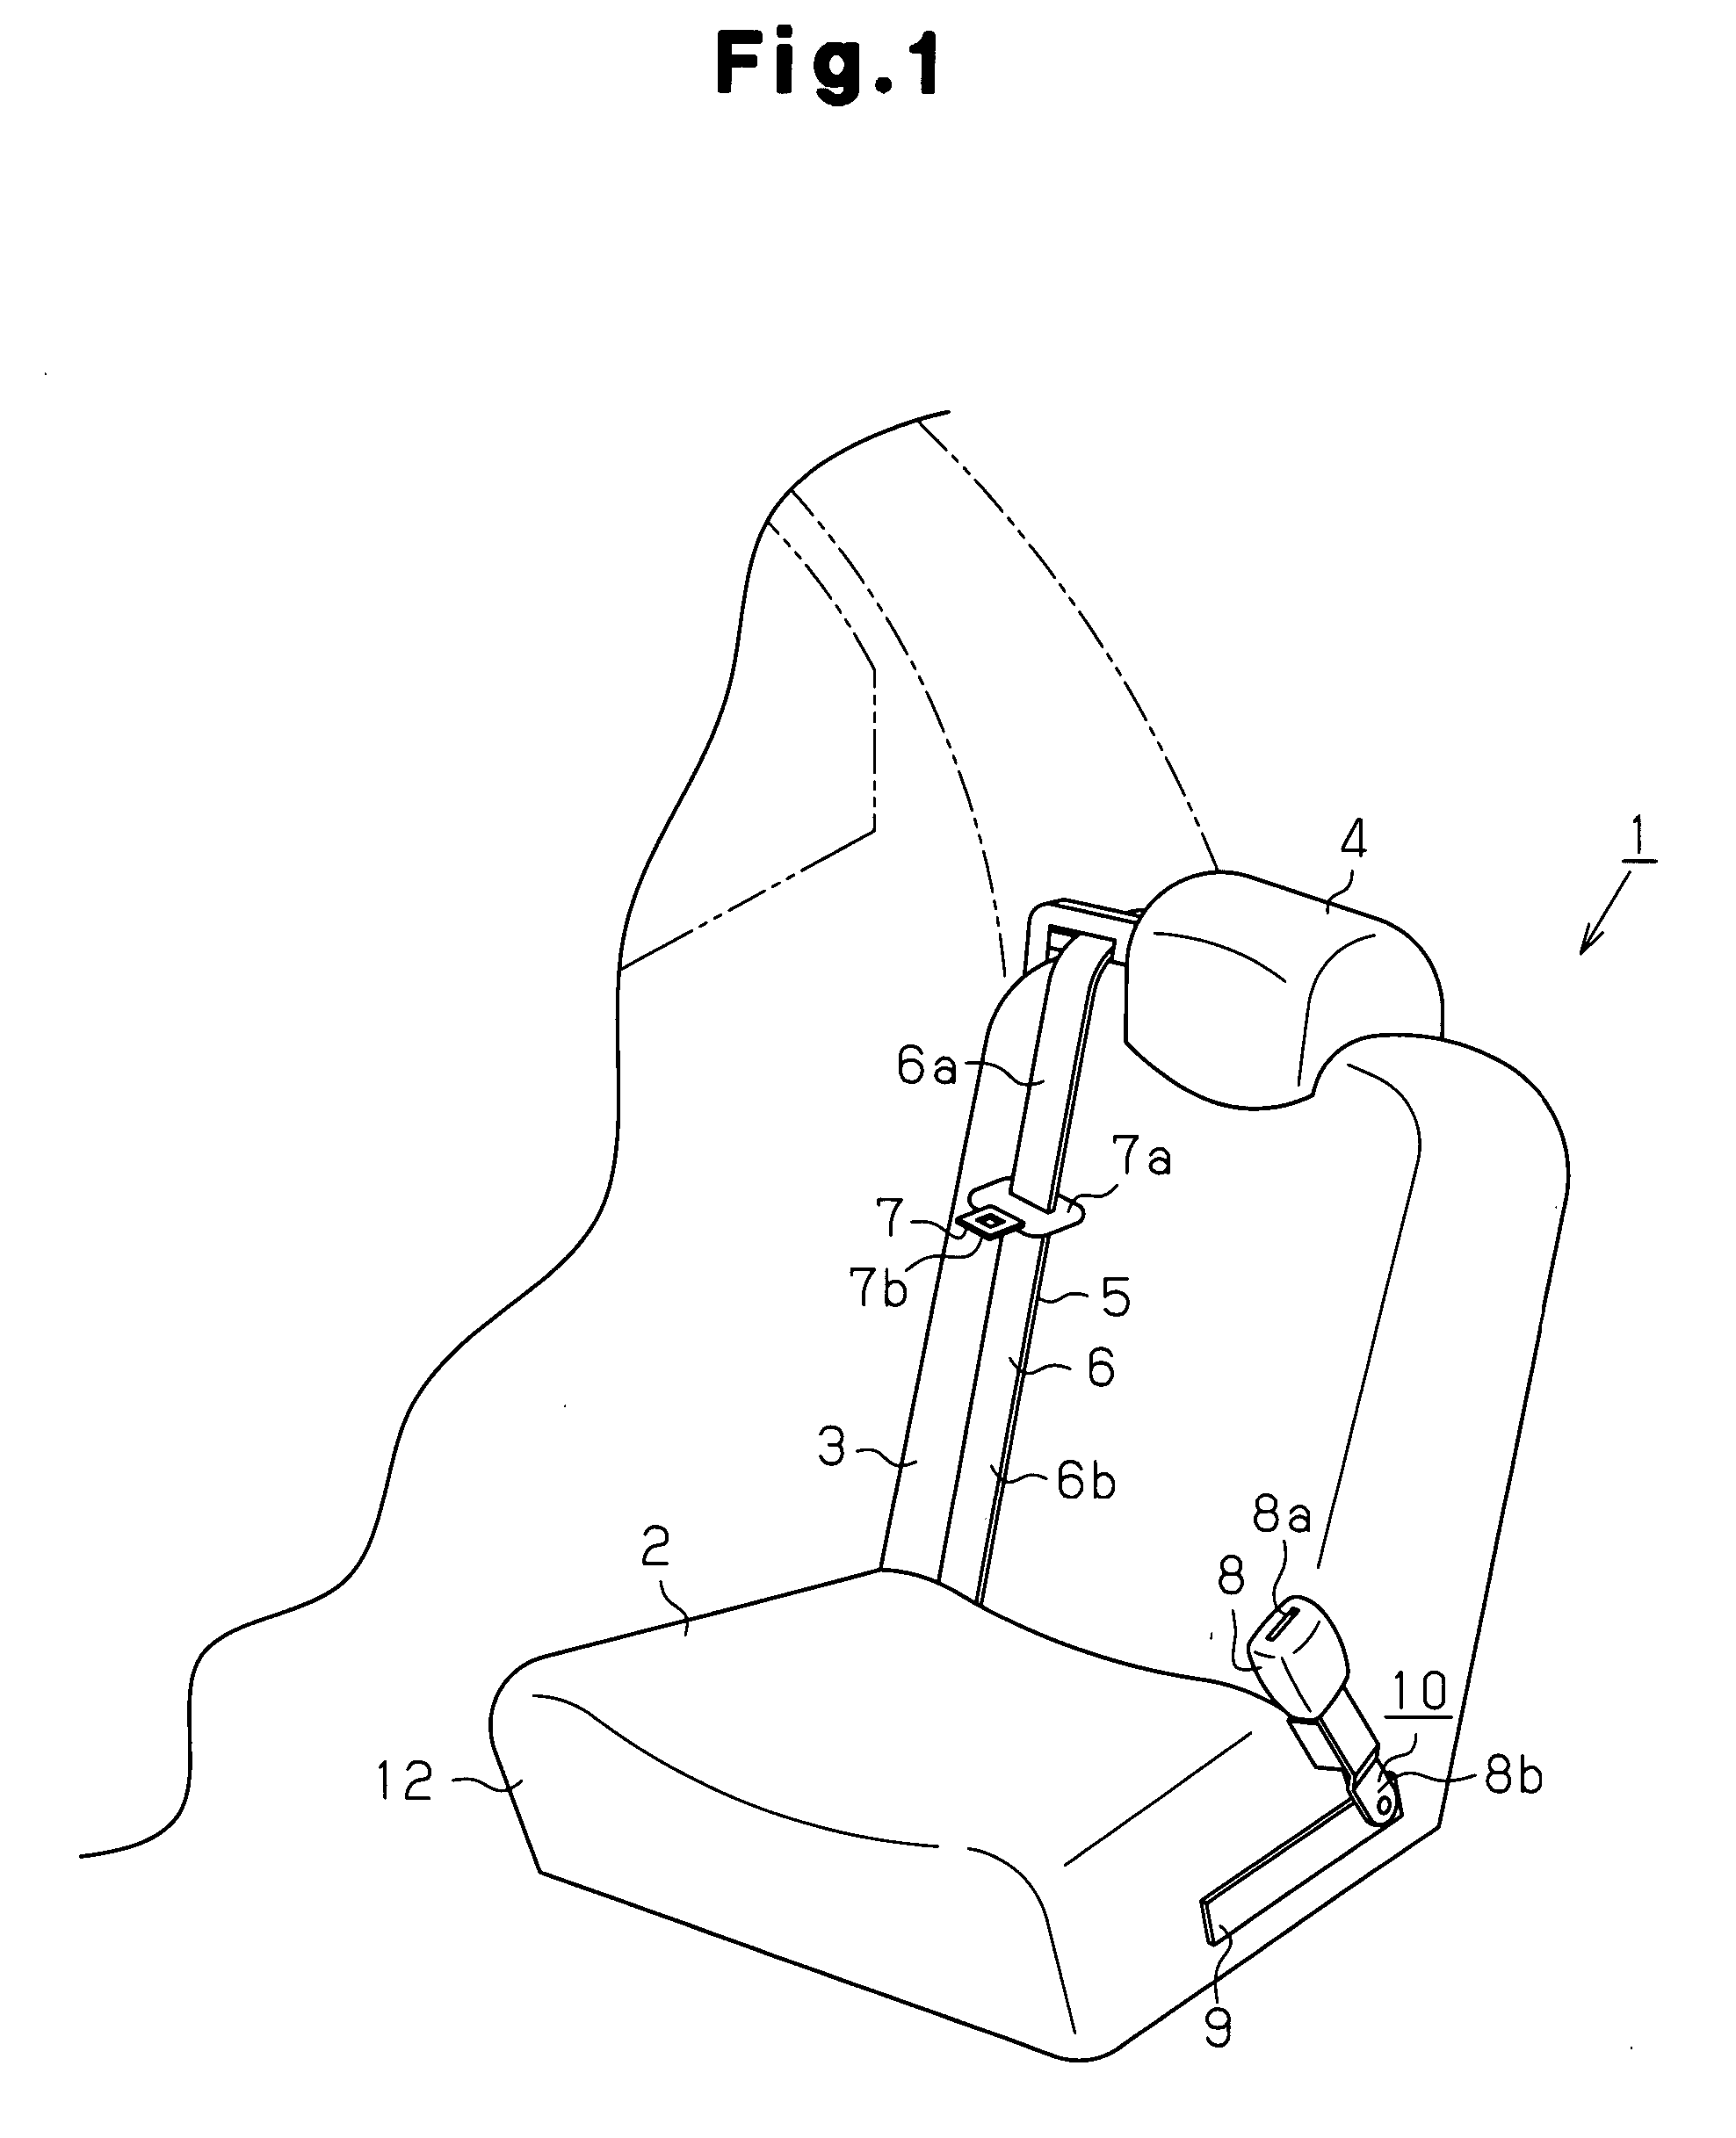 Occupant protection apparatus and method